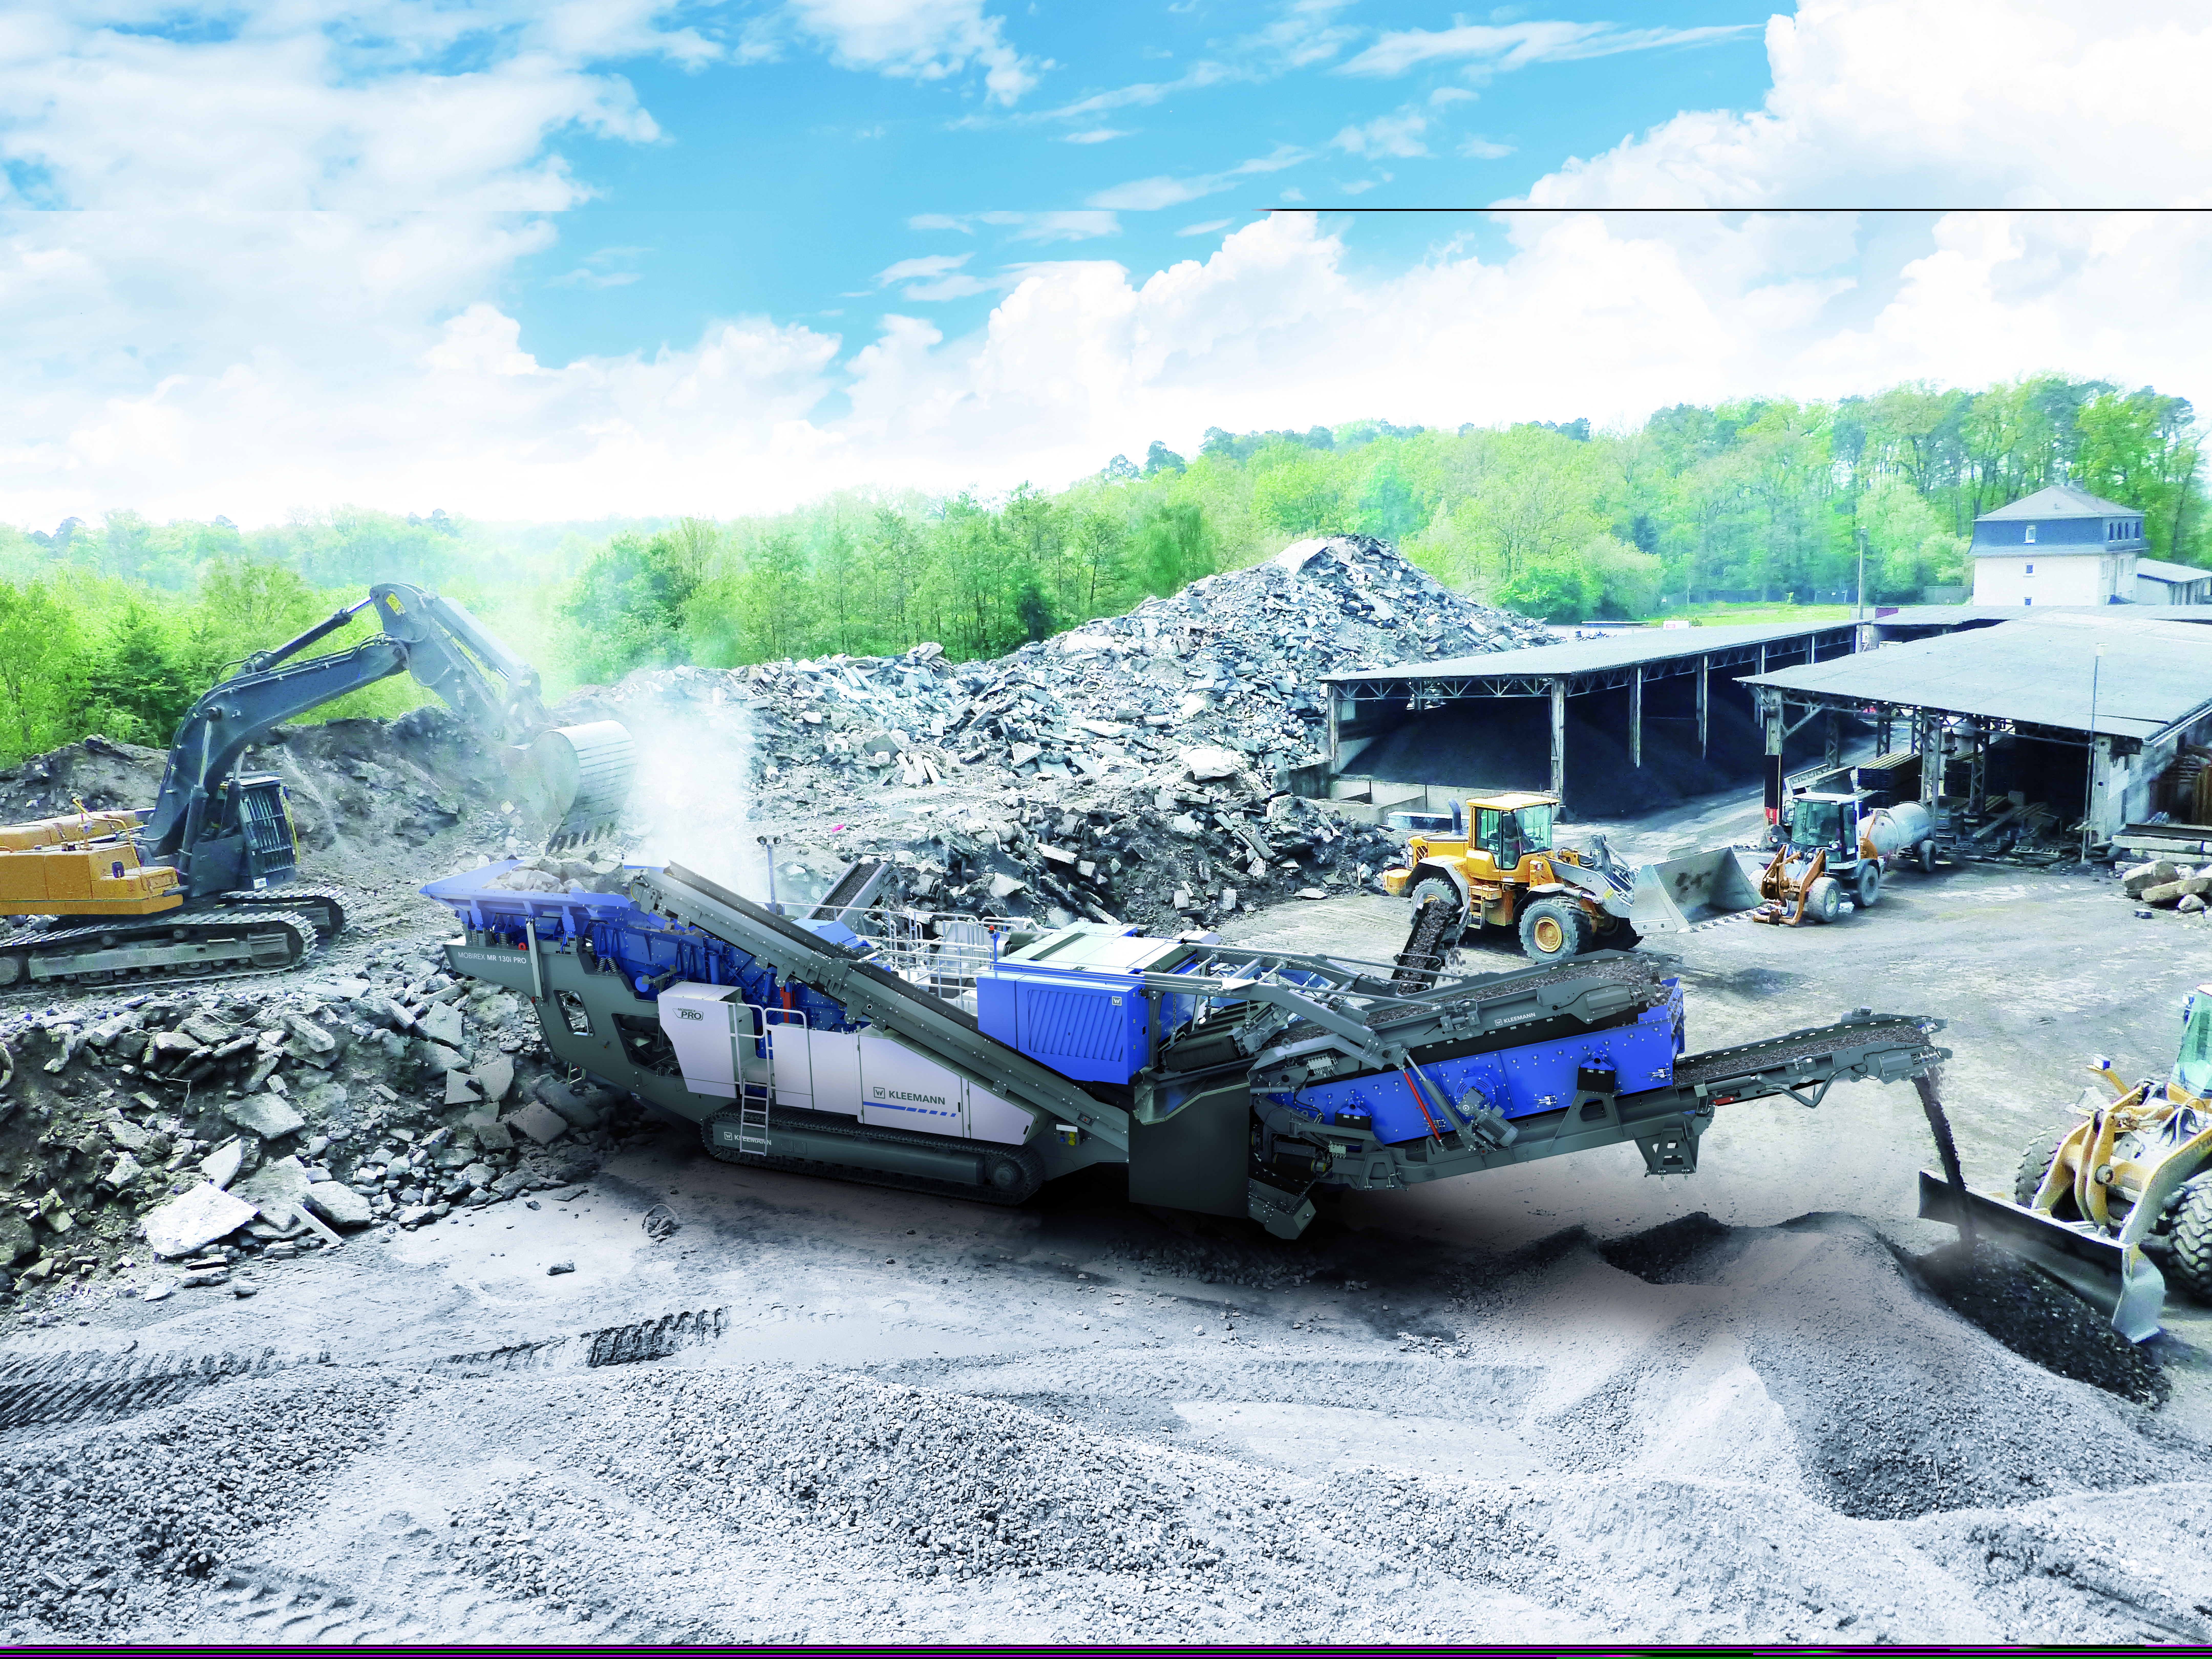 The preconditions for using a Kleemann crushing plant with E-DRIVE are often favourable in stationary recycling. An adequate power supply is often available, even occasionally from an in-company photovoltaic system. Pic: Kleemann